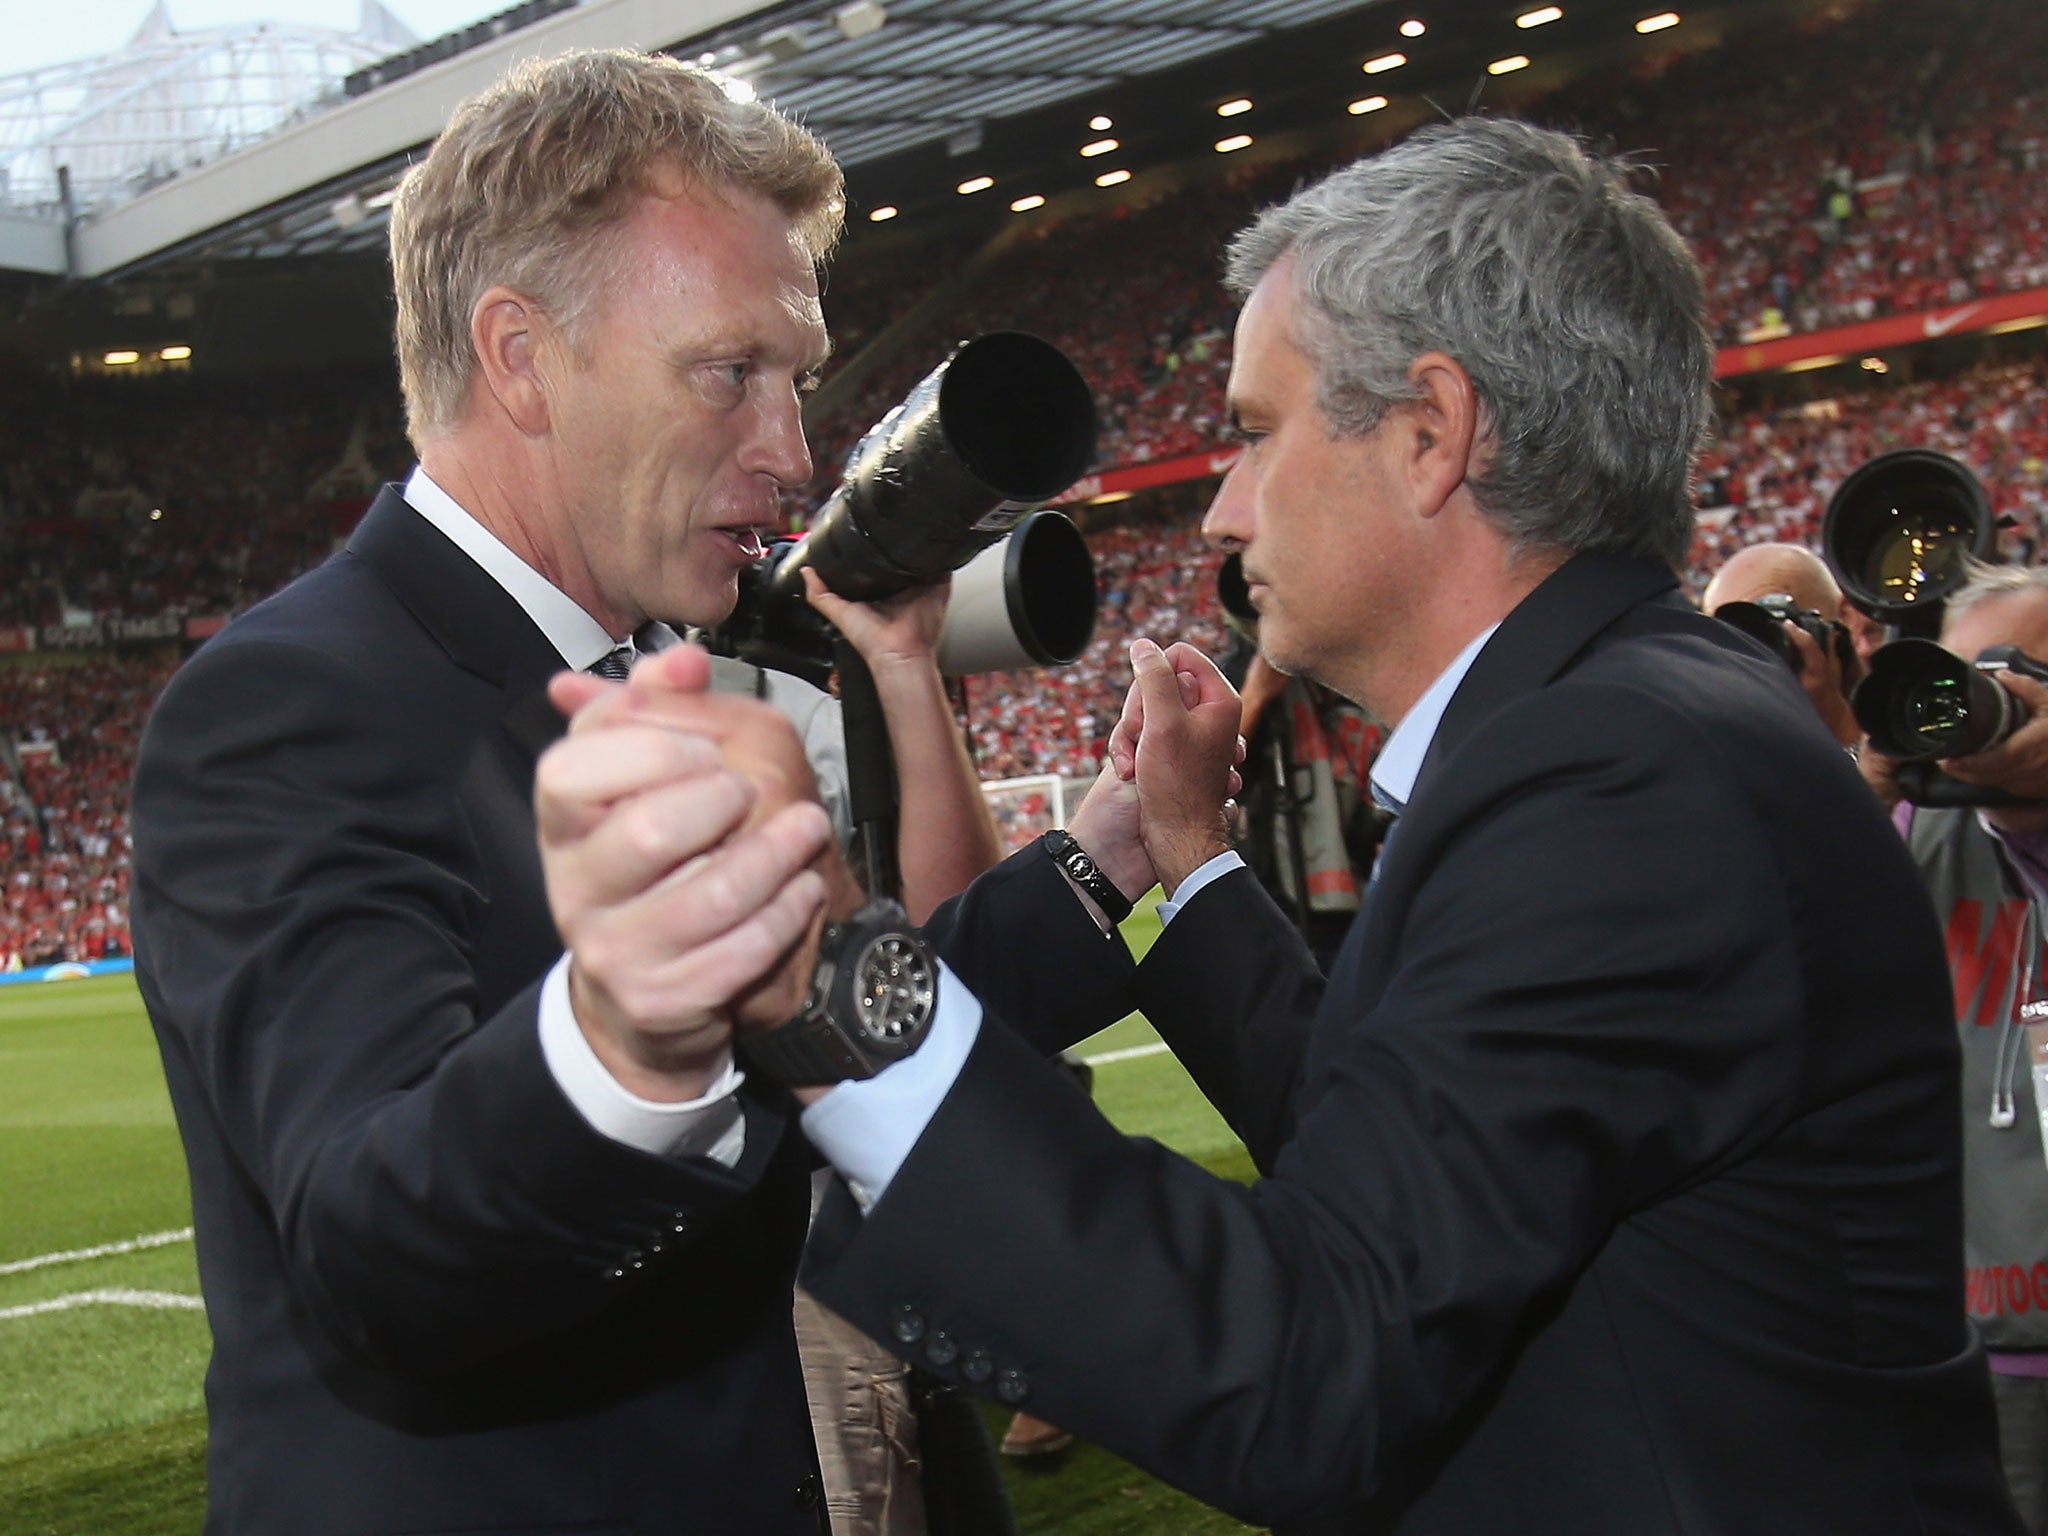 David Moyes received little sympathy from Jose Mourinho for his disastrous spell as Manchester United manager